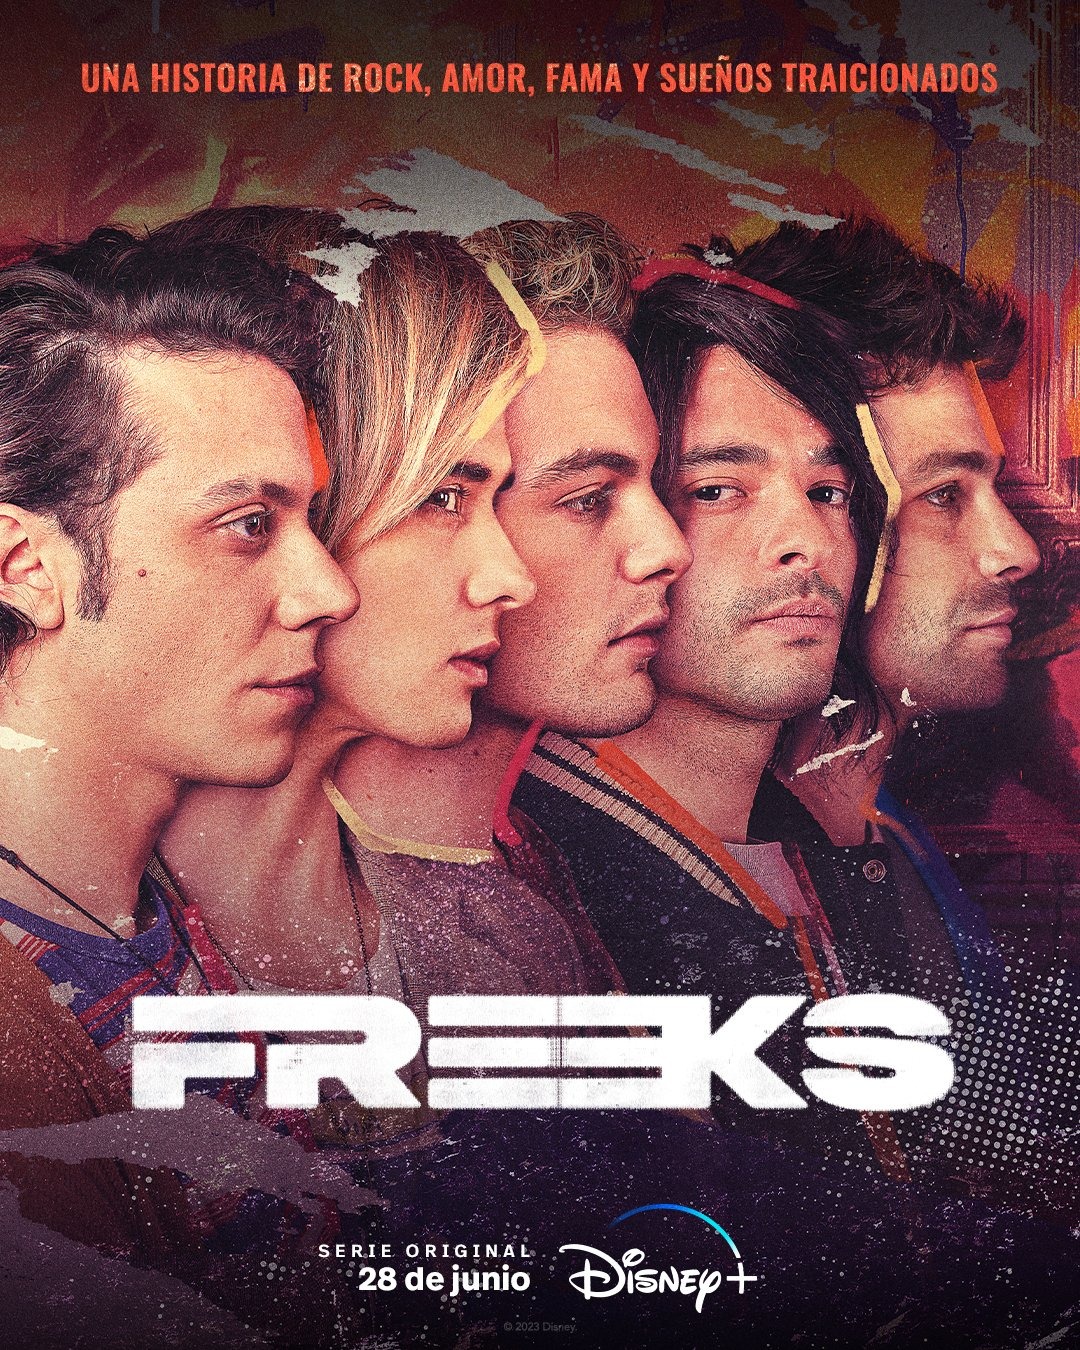 Extra Large TV Poster Image for FreeKs (#2 of 2)